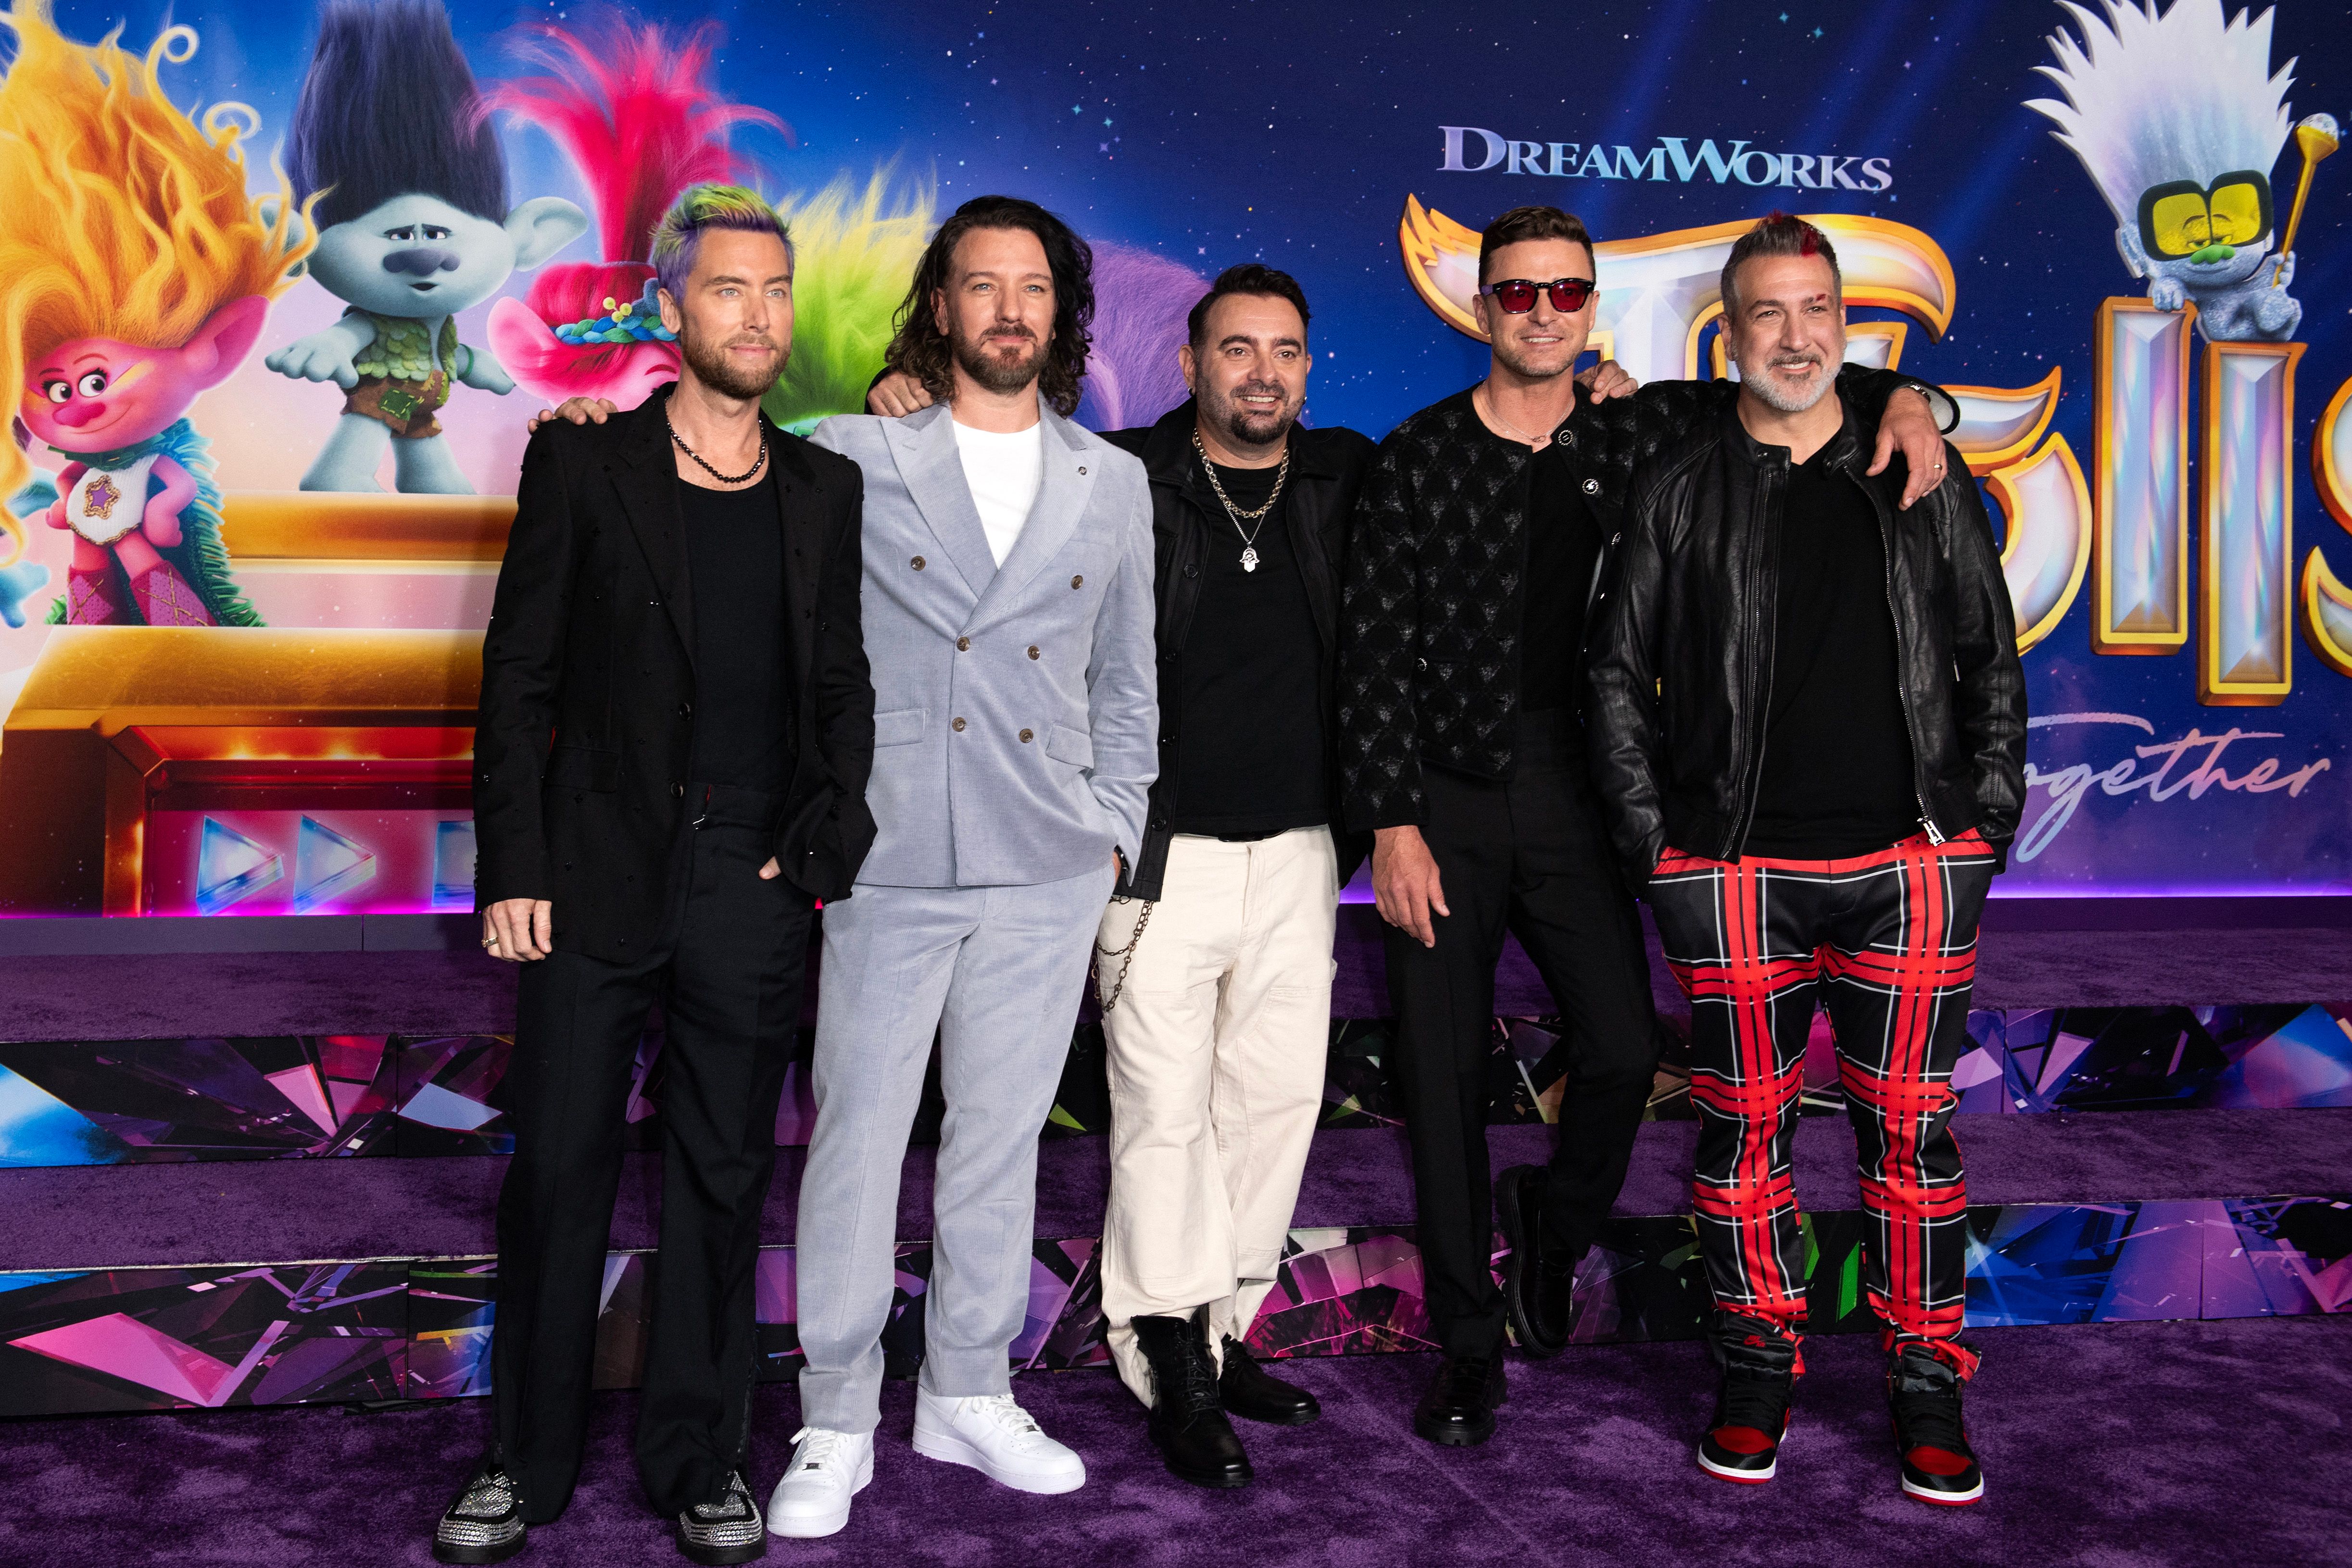 (From L) US singers Lance Bass, JC Chasez, Chris Kirkpatrick, Justin Timberlake, and Joey Fatone of boy band NSYNC arrive for the premiere of "Trolls: Band Together" at the TCL Chinese Theater in Hollywood, California, on November 15, 2023. (Photo by VALERIE MACON / AFP) (Photo by VALERIE MACON/AFP via Getty Images)